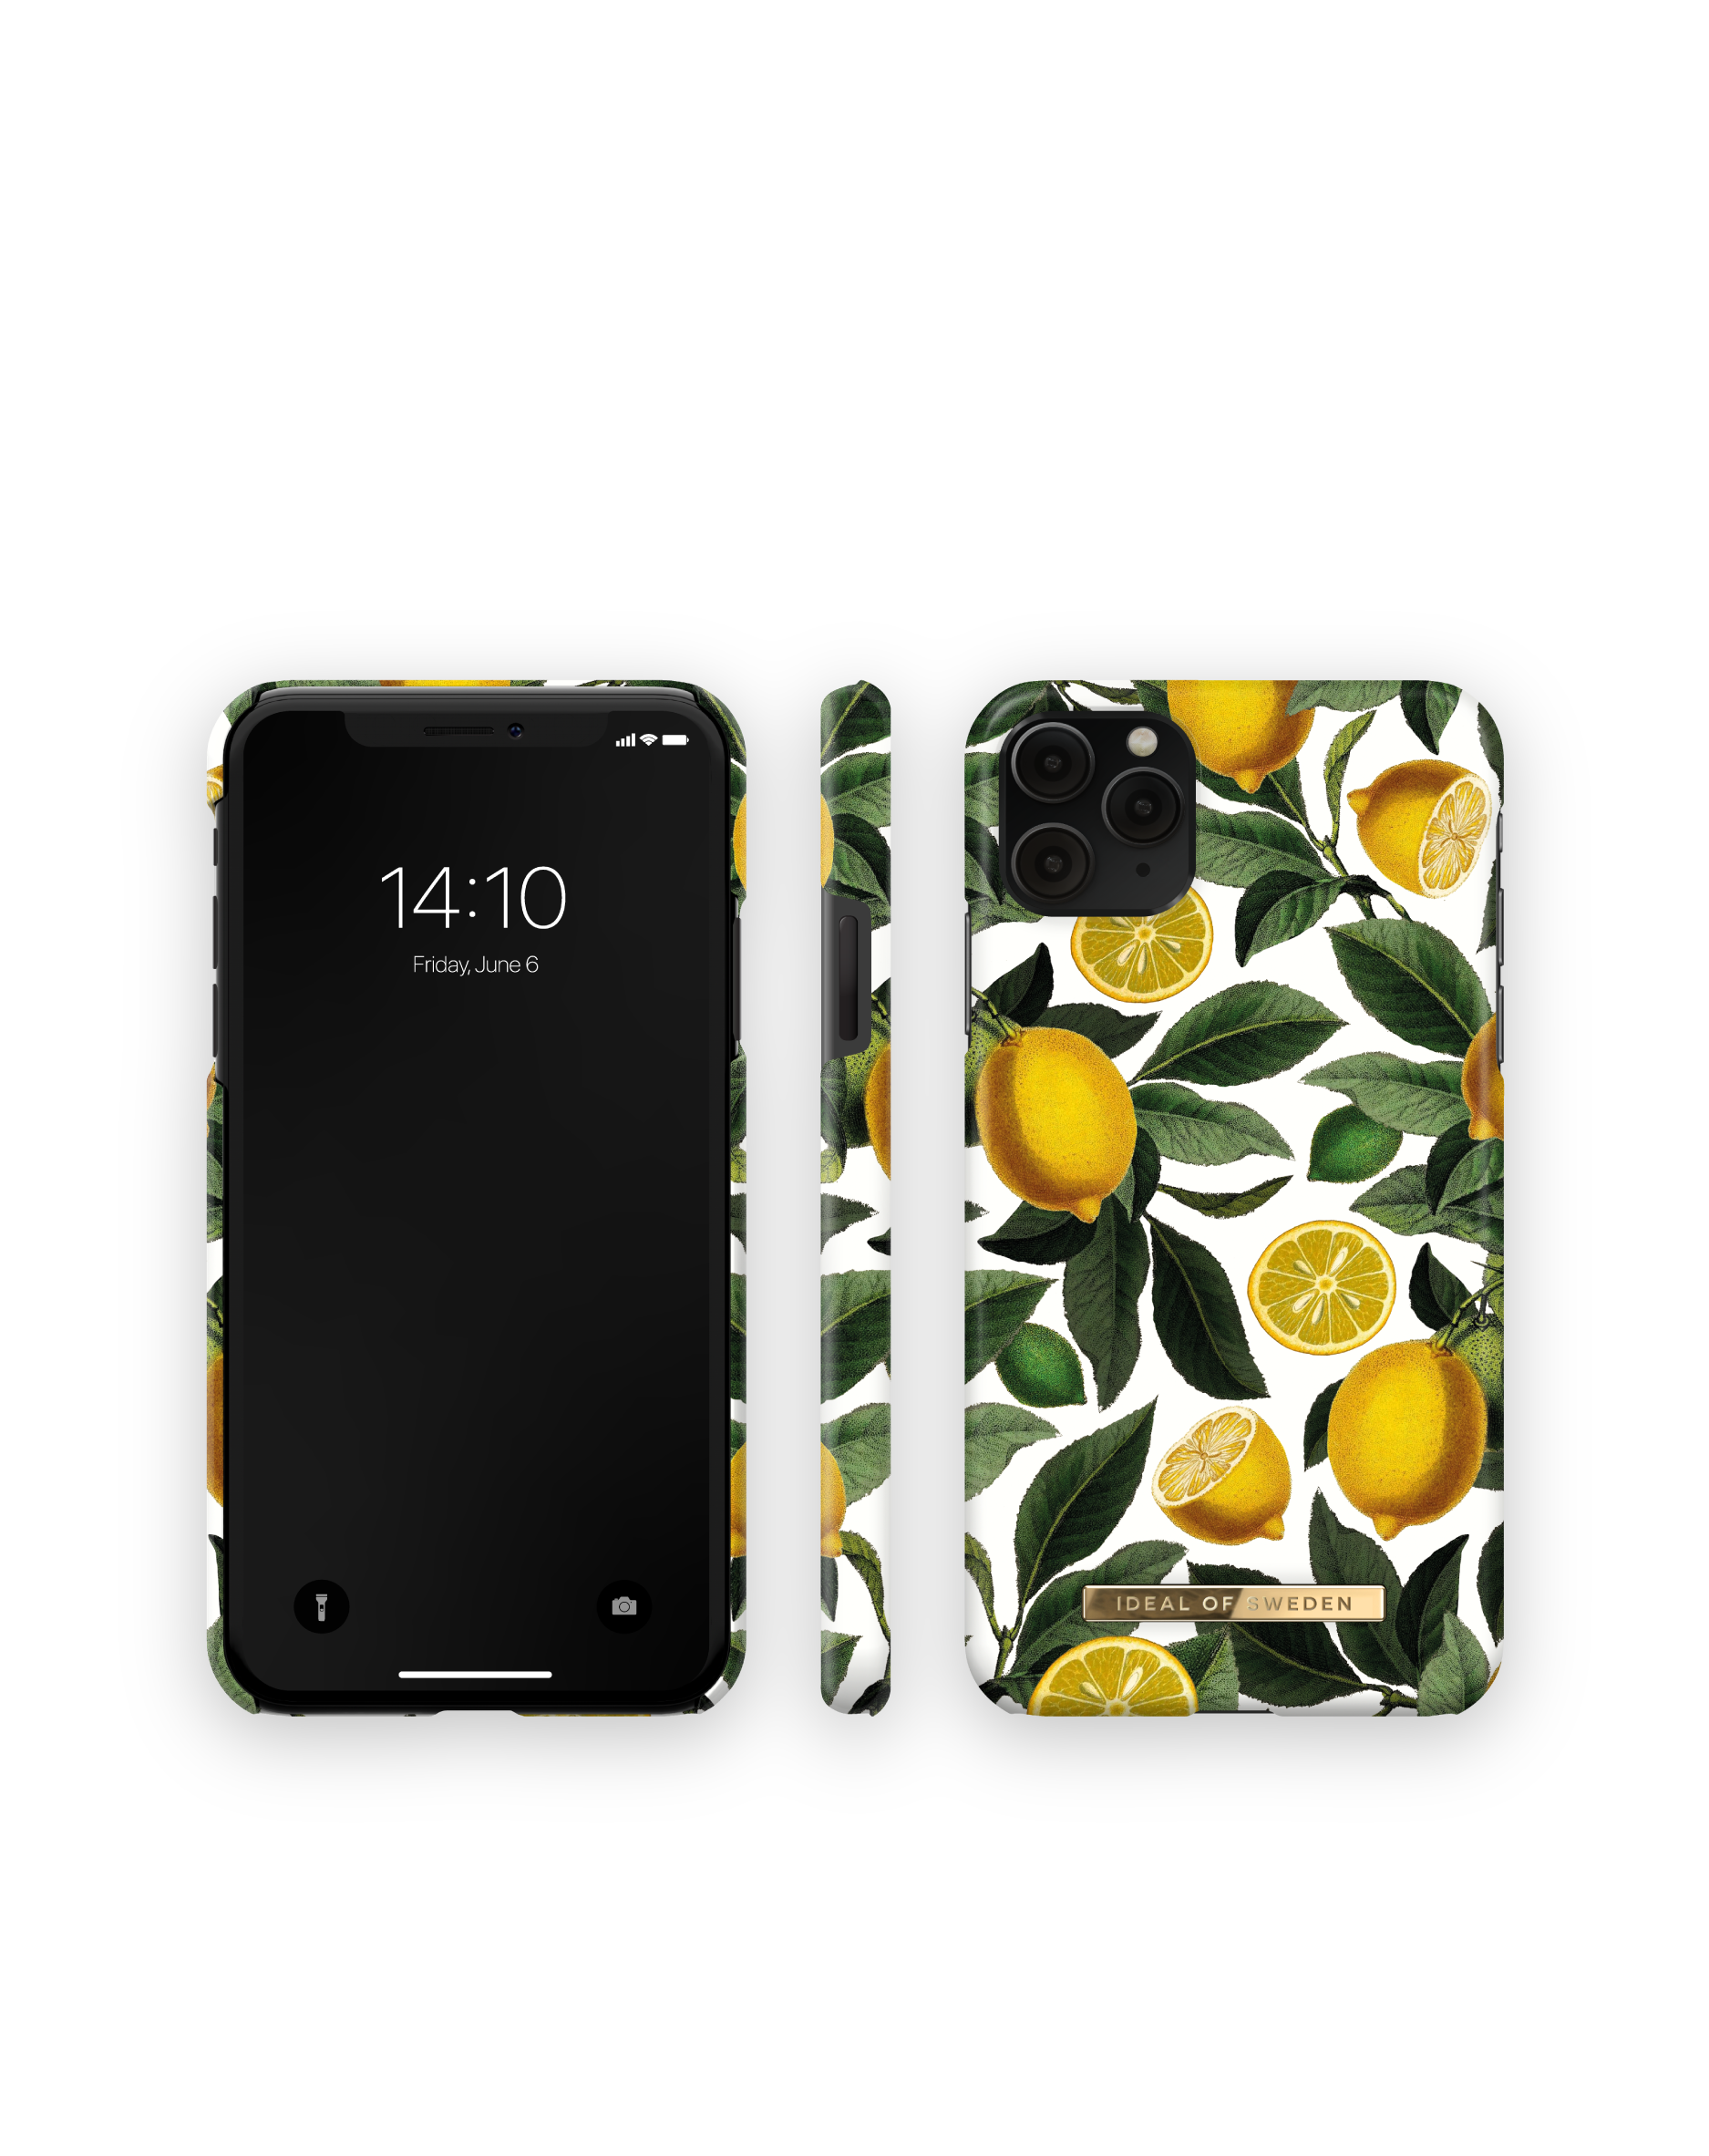 Apple, SWEDEN OF 11 iPhone Pro XS Max, Lemon Apple Max, IDFCSS20-I1965-196, Backcover, iPhone Apple IDEAL Bliss